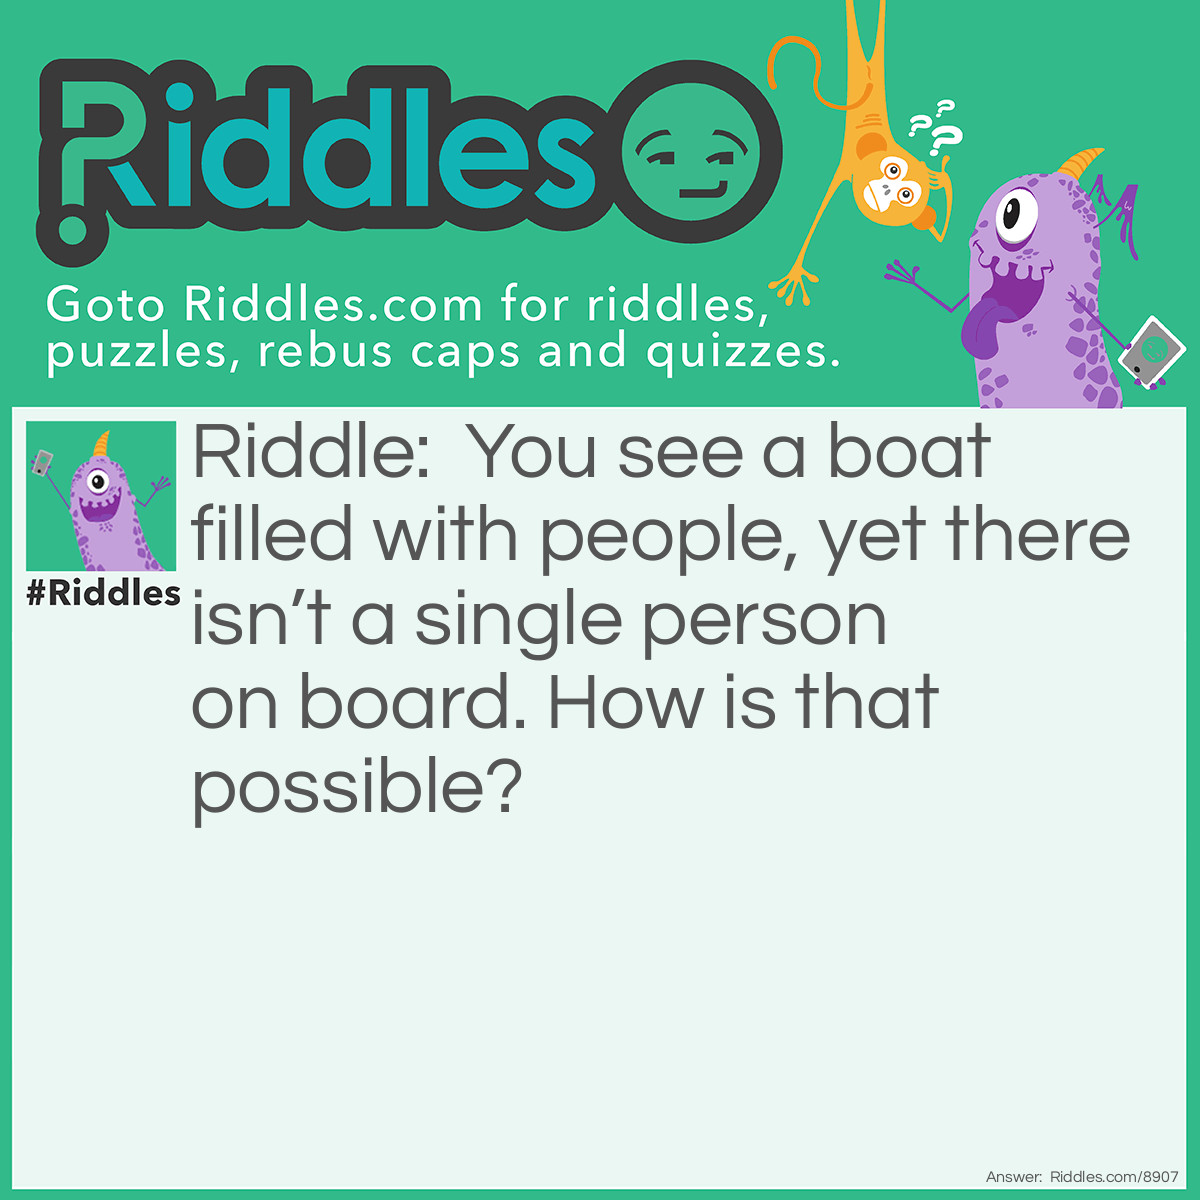 Riddle: You see a boat filled with people, yet there isn't a single person on board. How is that possible? Answer: All the people on the boat are married.